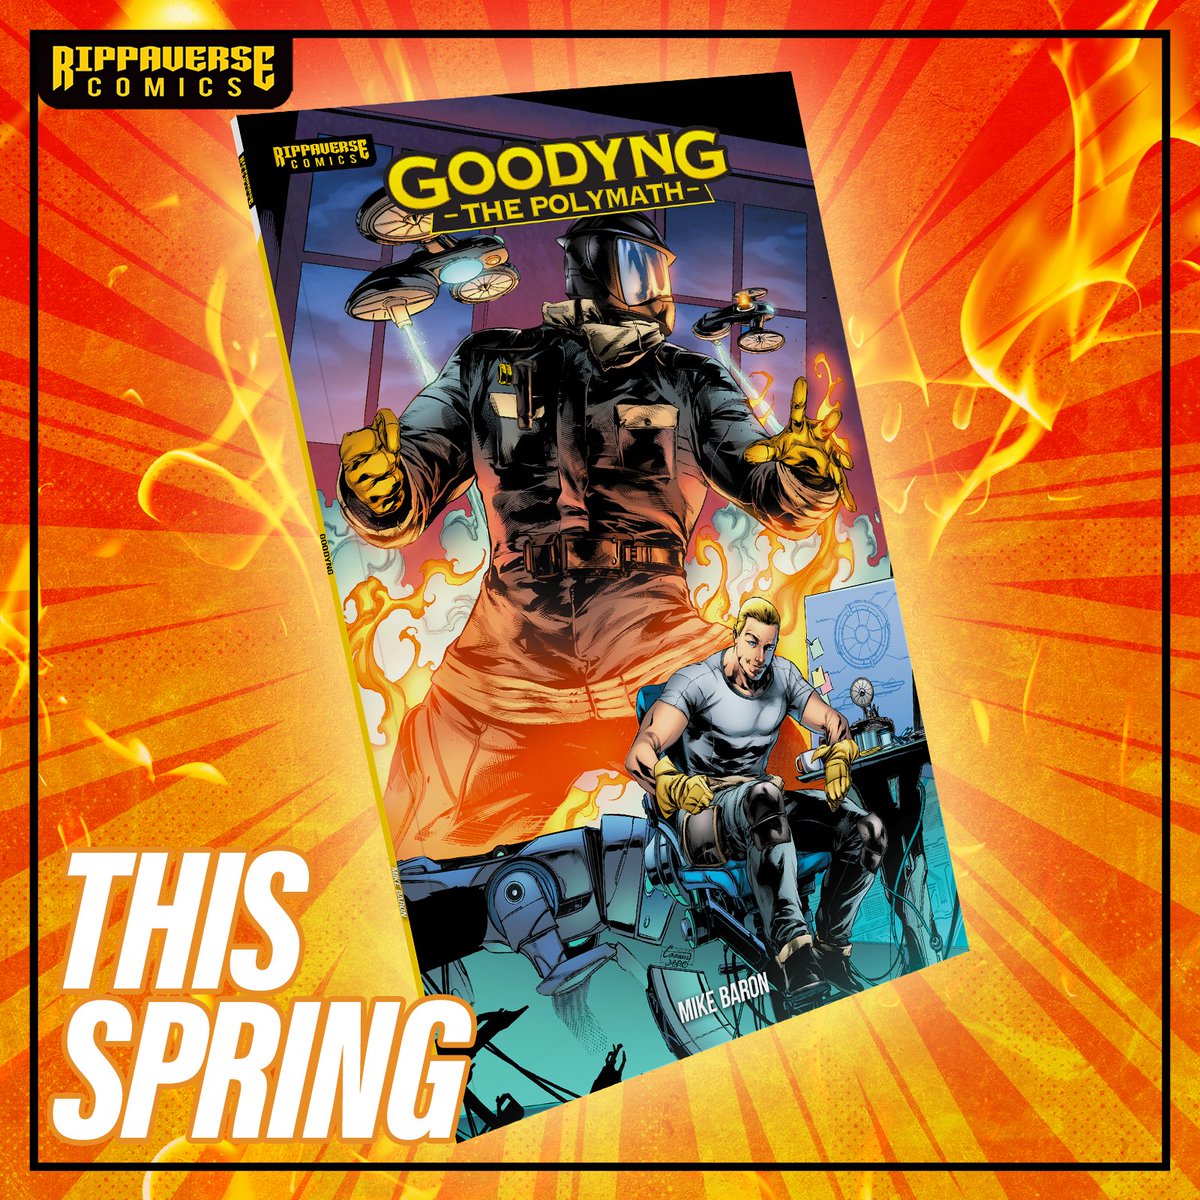 Remember, folks, 'Goodyng: The Polymath' goes live right after the Yaira #1 campaign wraps up! Written by the legendary Mike Baron and with art from the amazing Will Conrad, this one's sure to knock your socks off. Get ready to turn up the temperature this Spring!